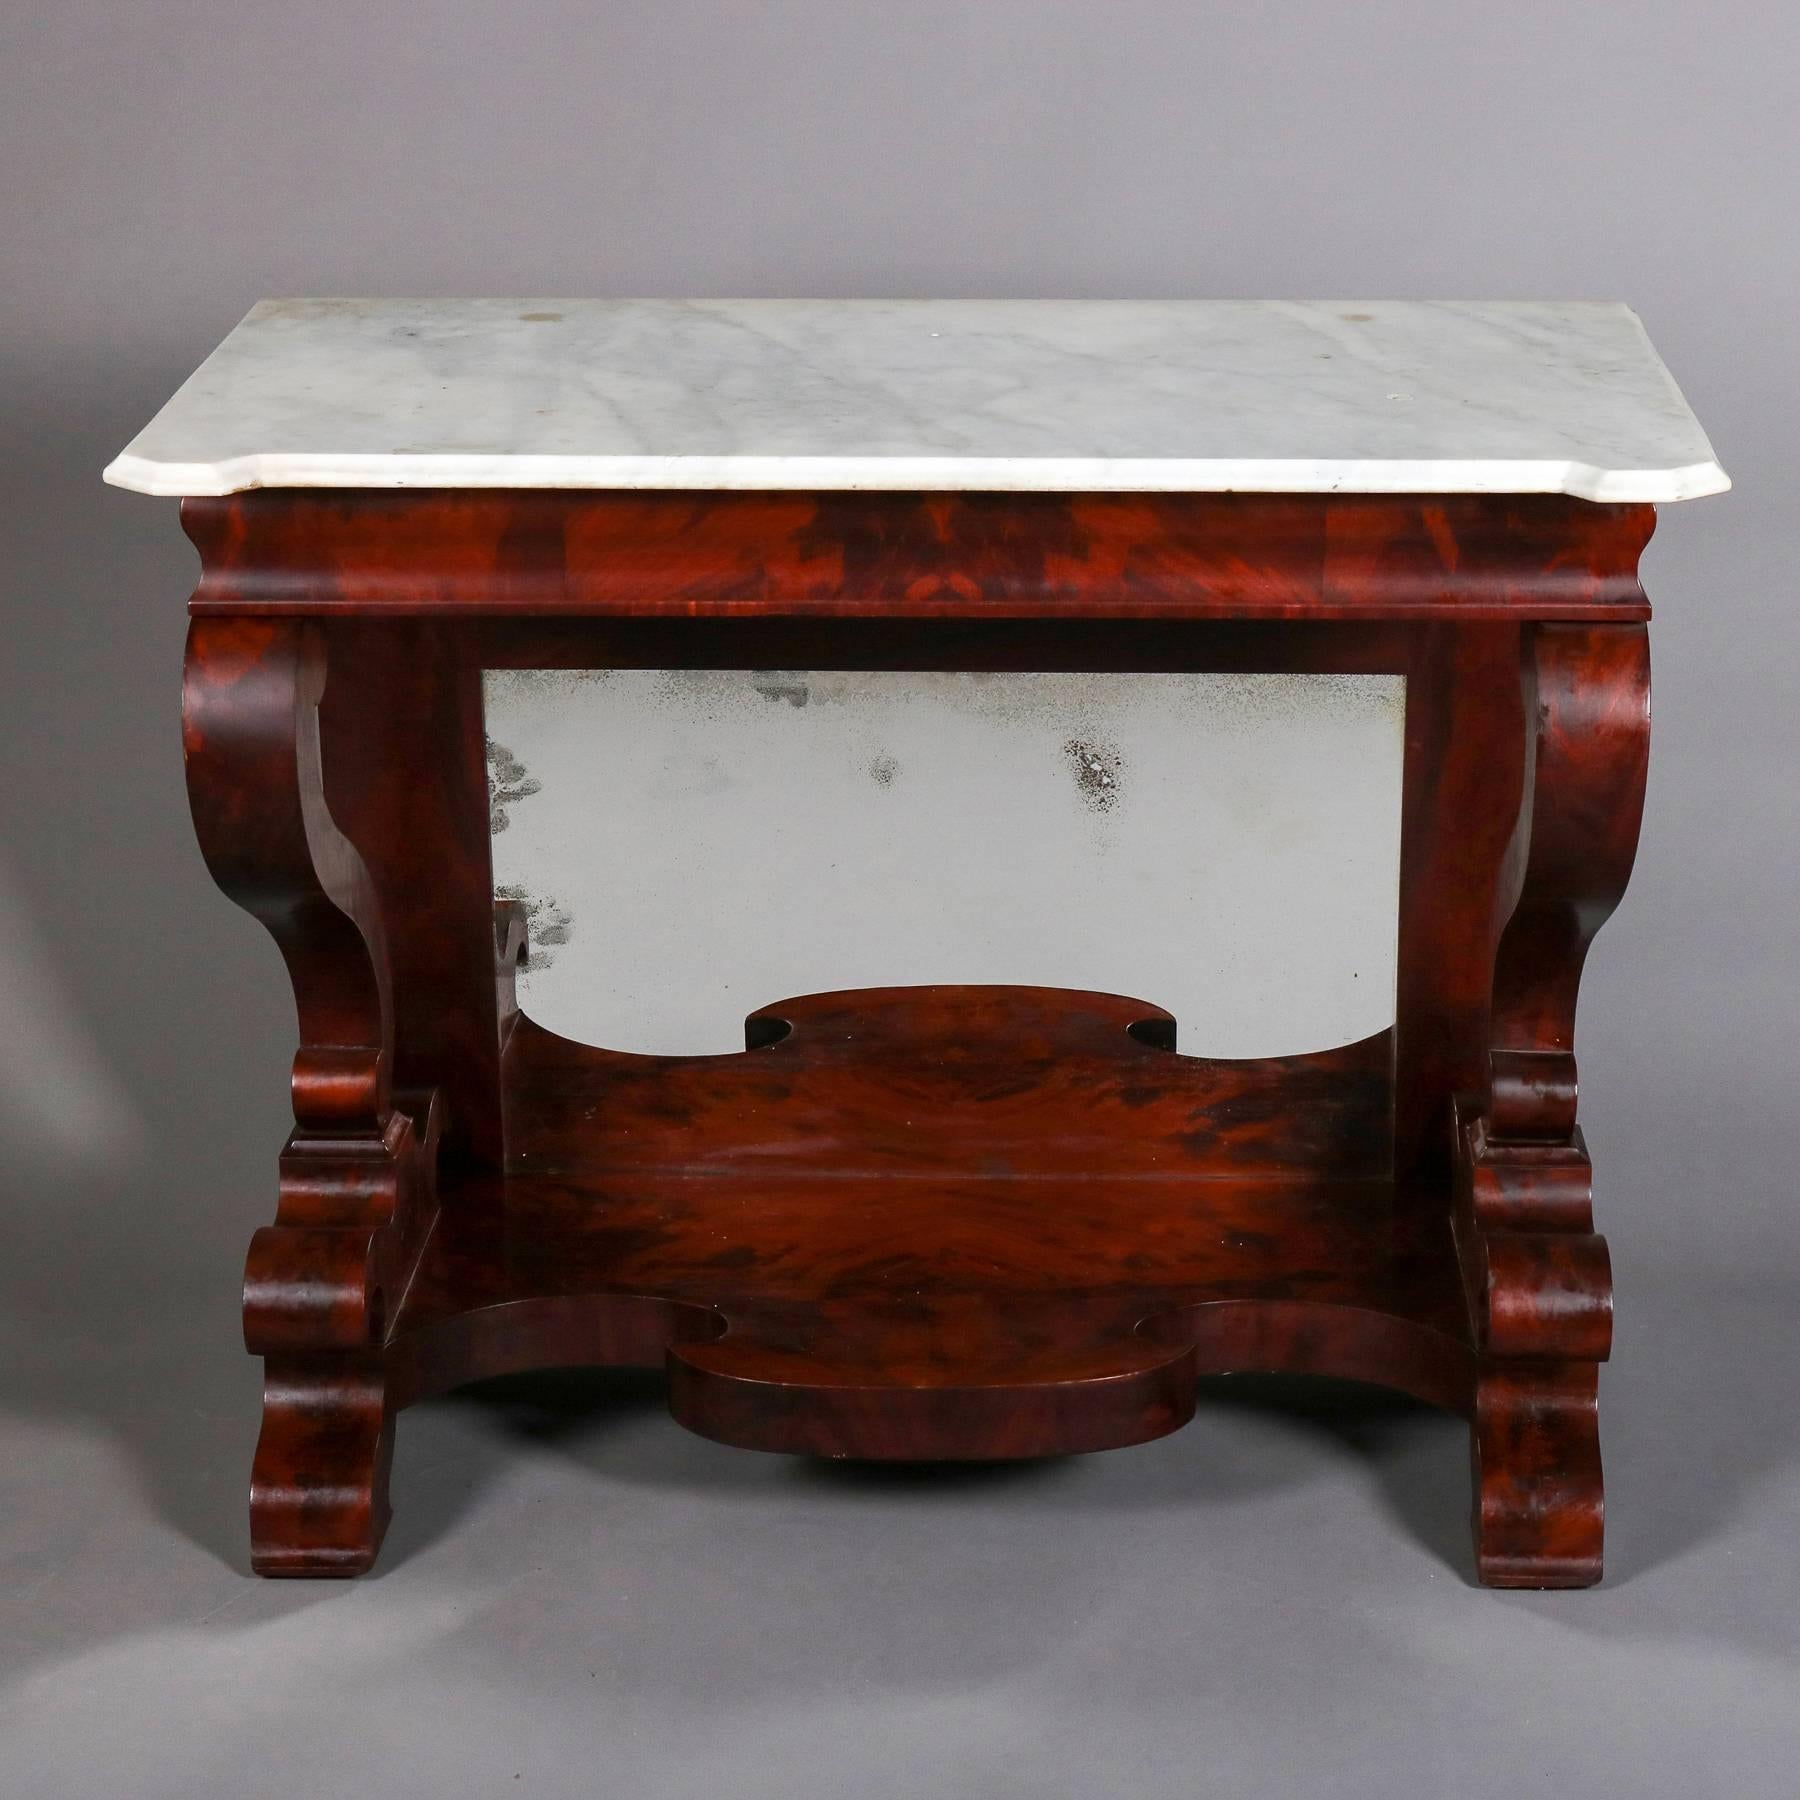 Antique Joseph Meeks School Classical American Empire flame mahogany pier table features open sides with s-scroll supports and scroll form base, mirrored apron, and marble top, reminiscent of work by Quervelle and Joseph Meeks, 19th